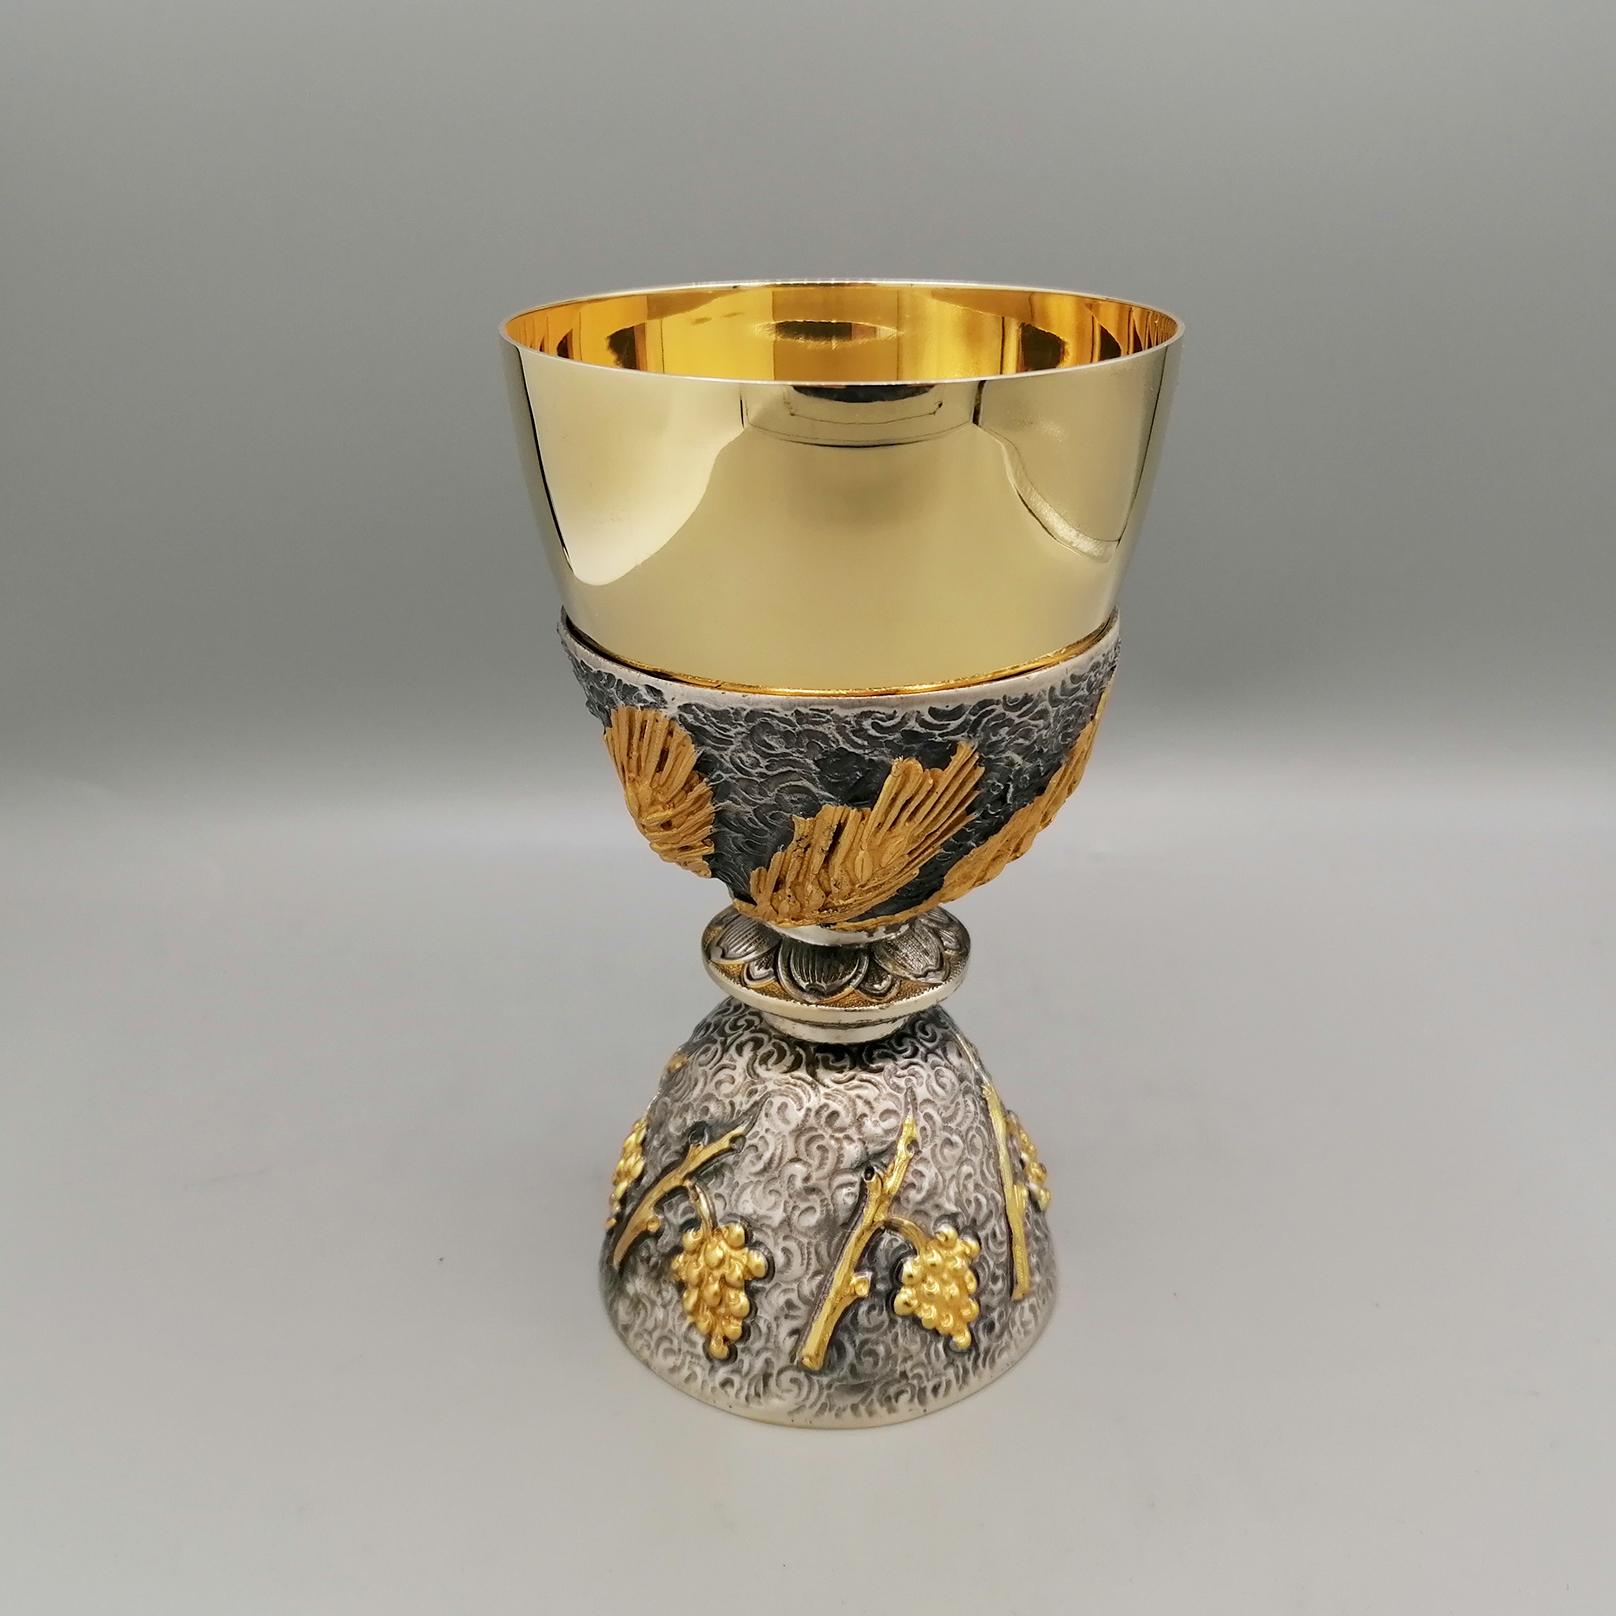 Liturgical chalice made of sterling silver. 
The body was made using the casting technique while the chalice cup was made from a lathe-turned silver sheet and then plated with 24kt gold.
The base of the chalice was made with designs of grape shoots